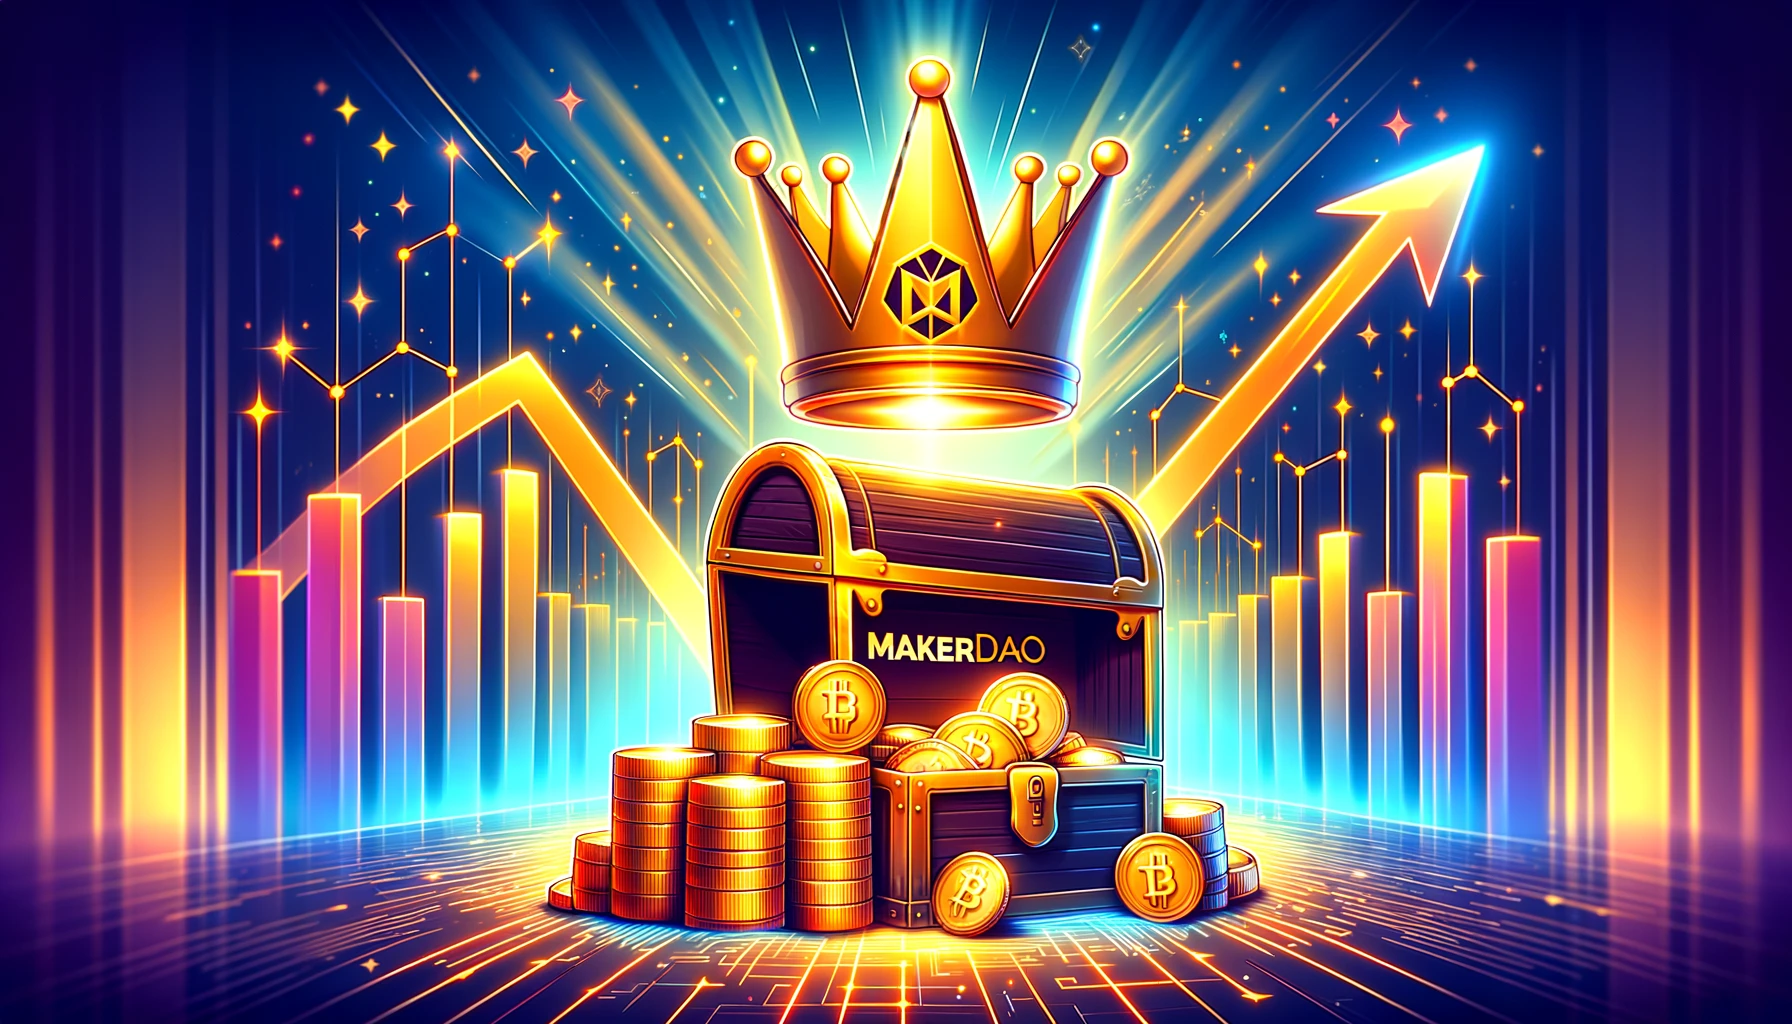 As MakerDAO tops in revenue, is MKR now undervalued?